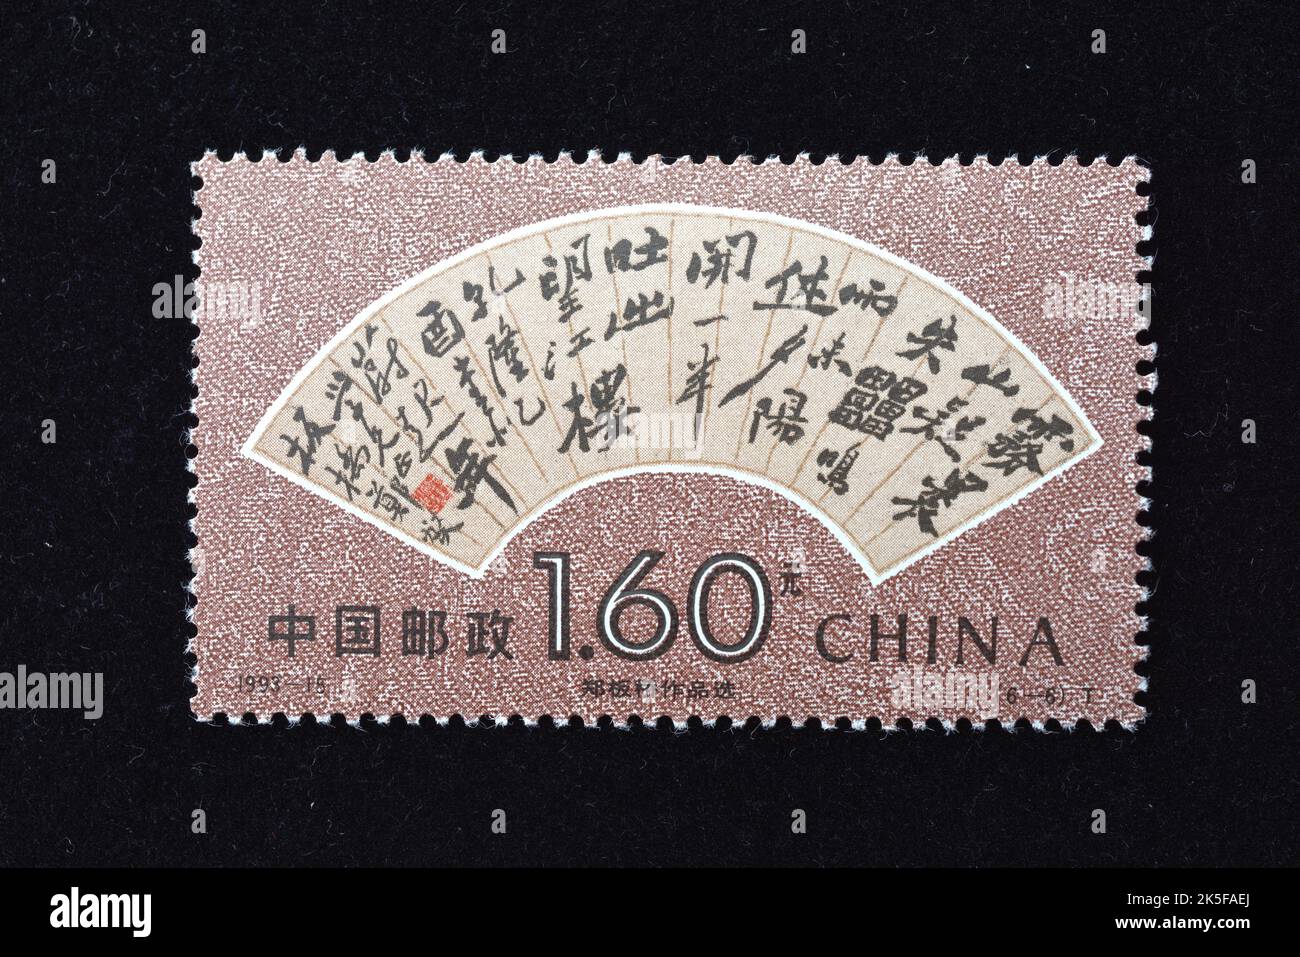 CHINA - CIRCA 1993: A stamp printed in China shows 1993-15, Scott 2471-76 Selected Art Works by Zheng Banqiao , circa 1993 Stock Photo